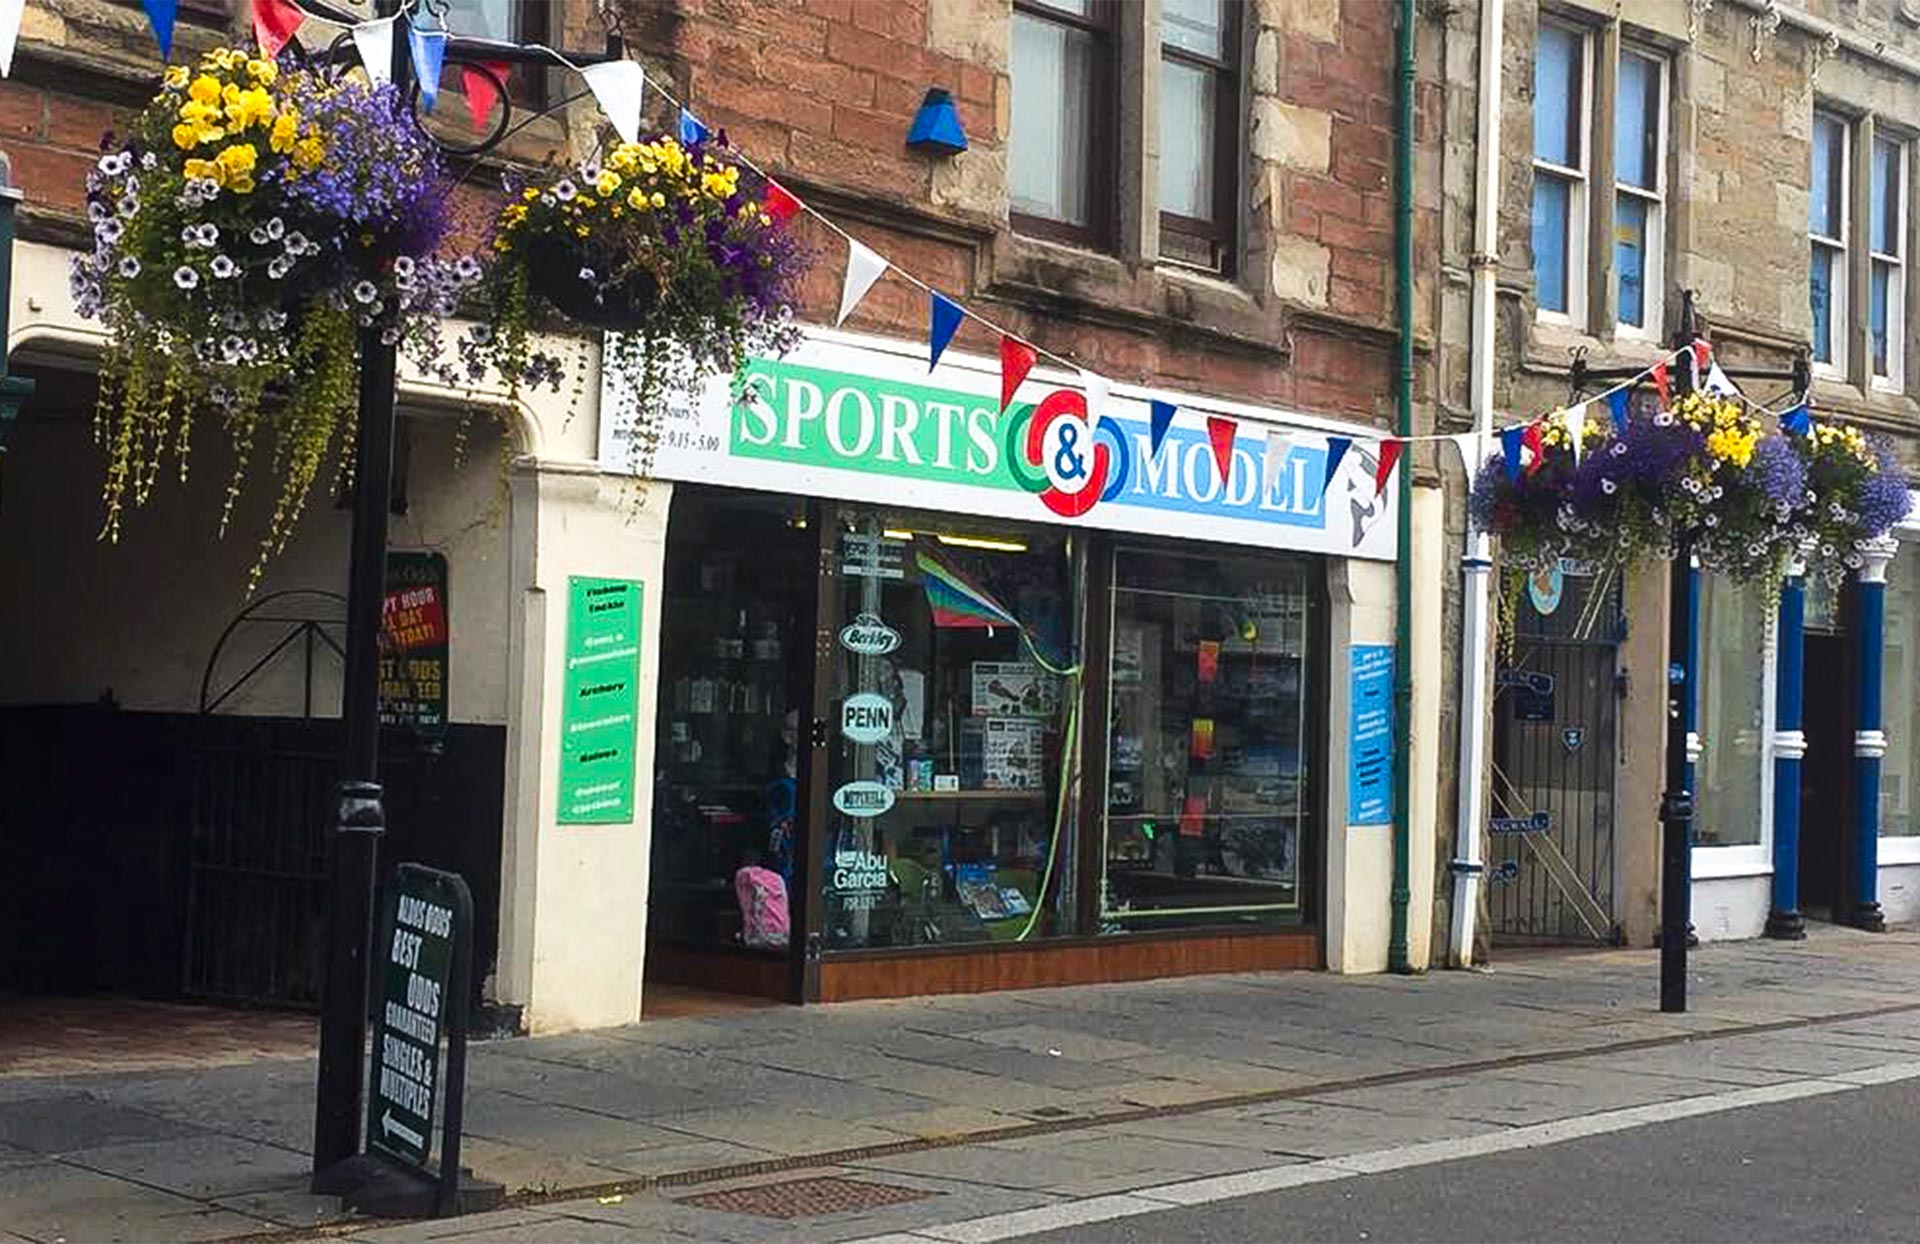 The Sport and Model Shop